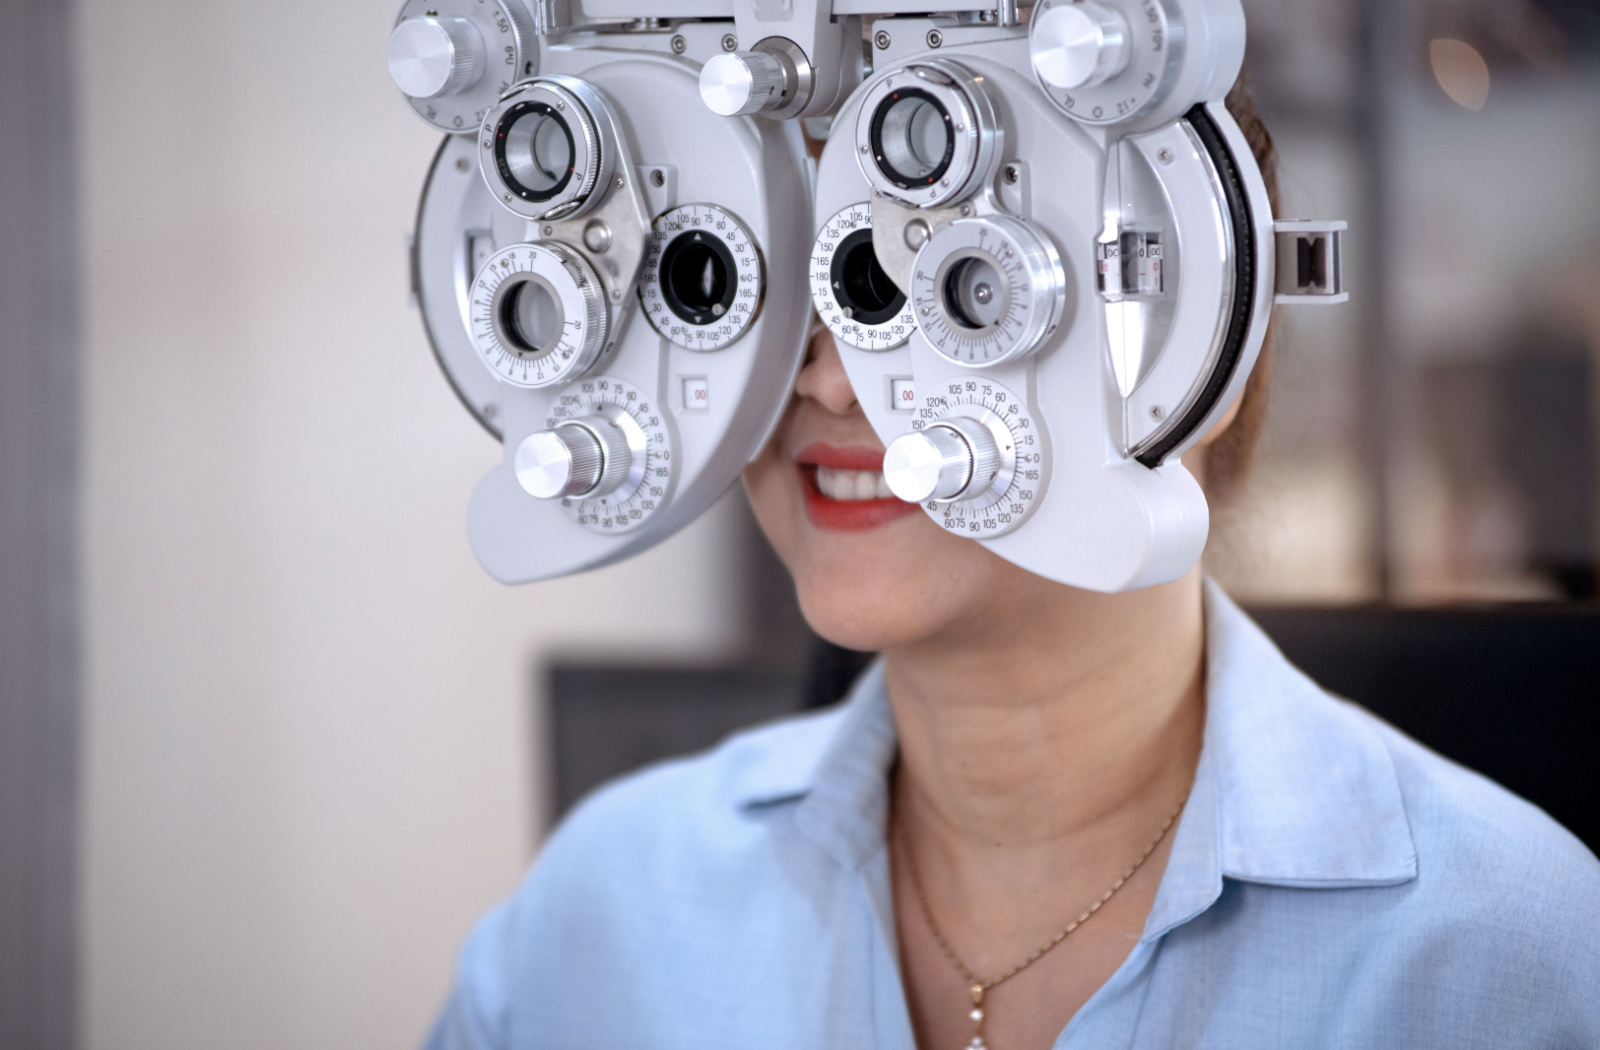 A female patient sits behind a phoropter at the optometrist's office during her eye exam